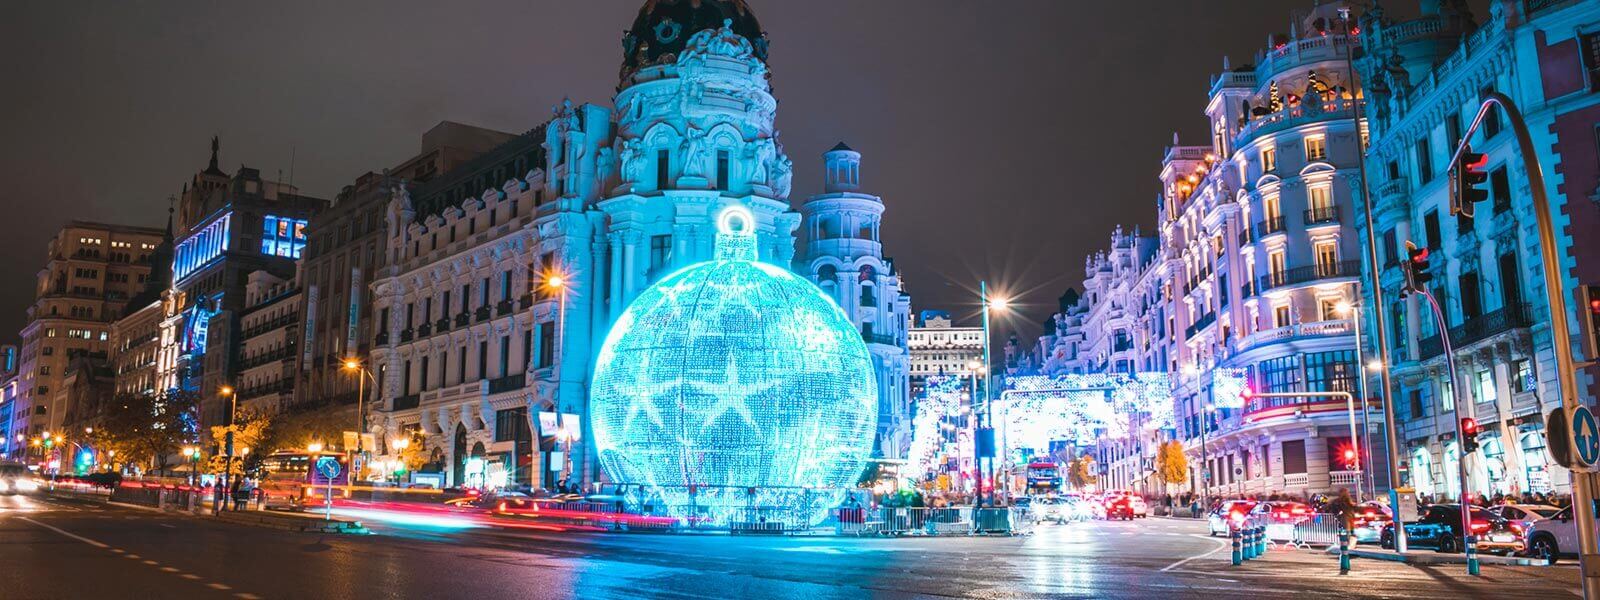 Christmas decorations in Spain